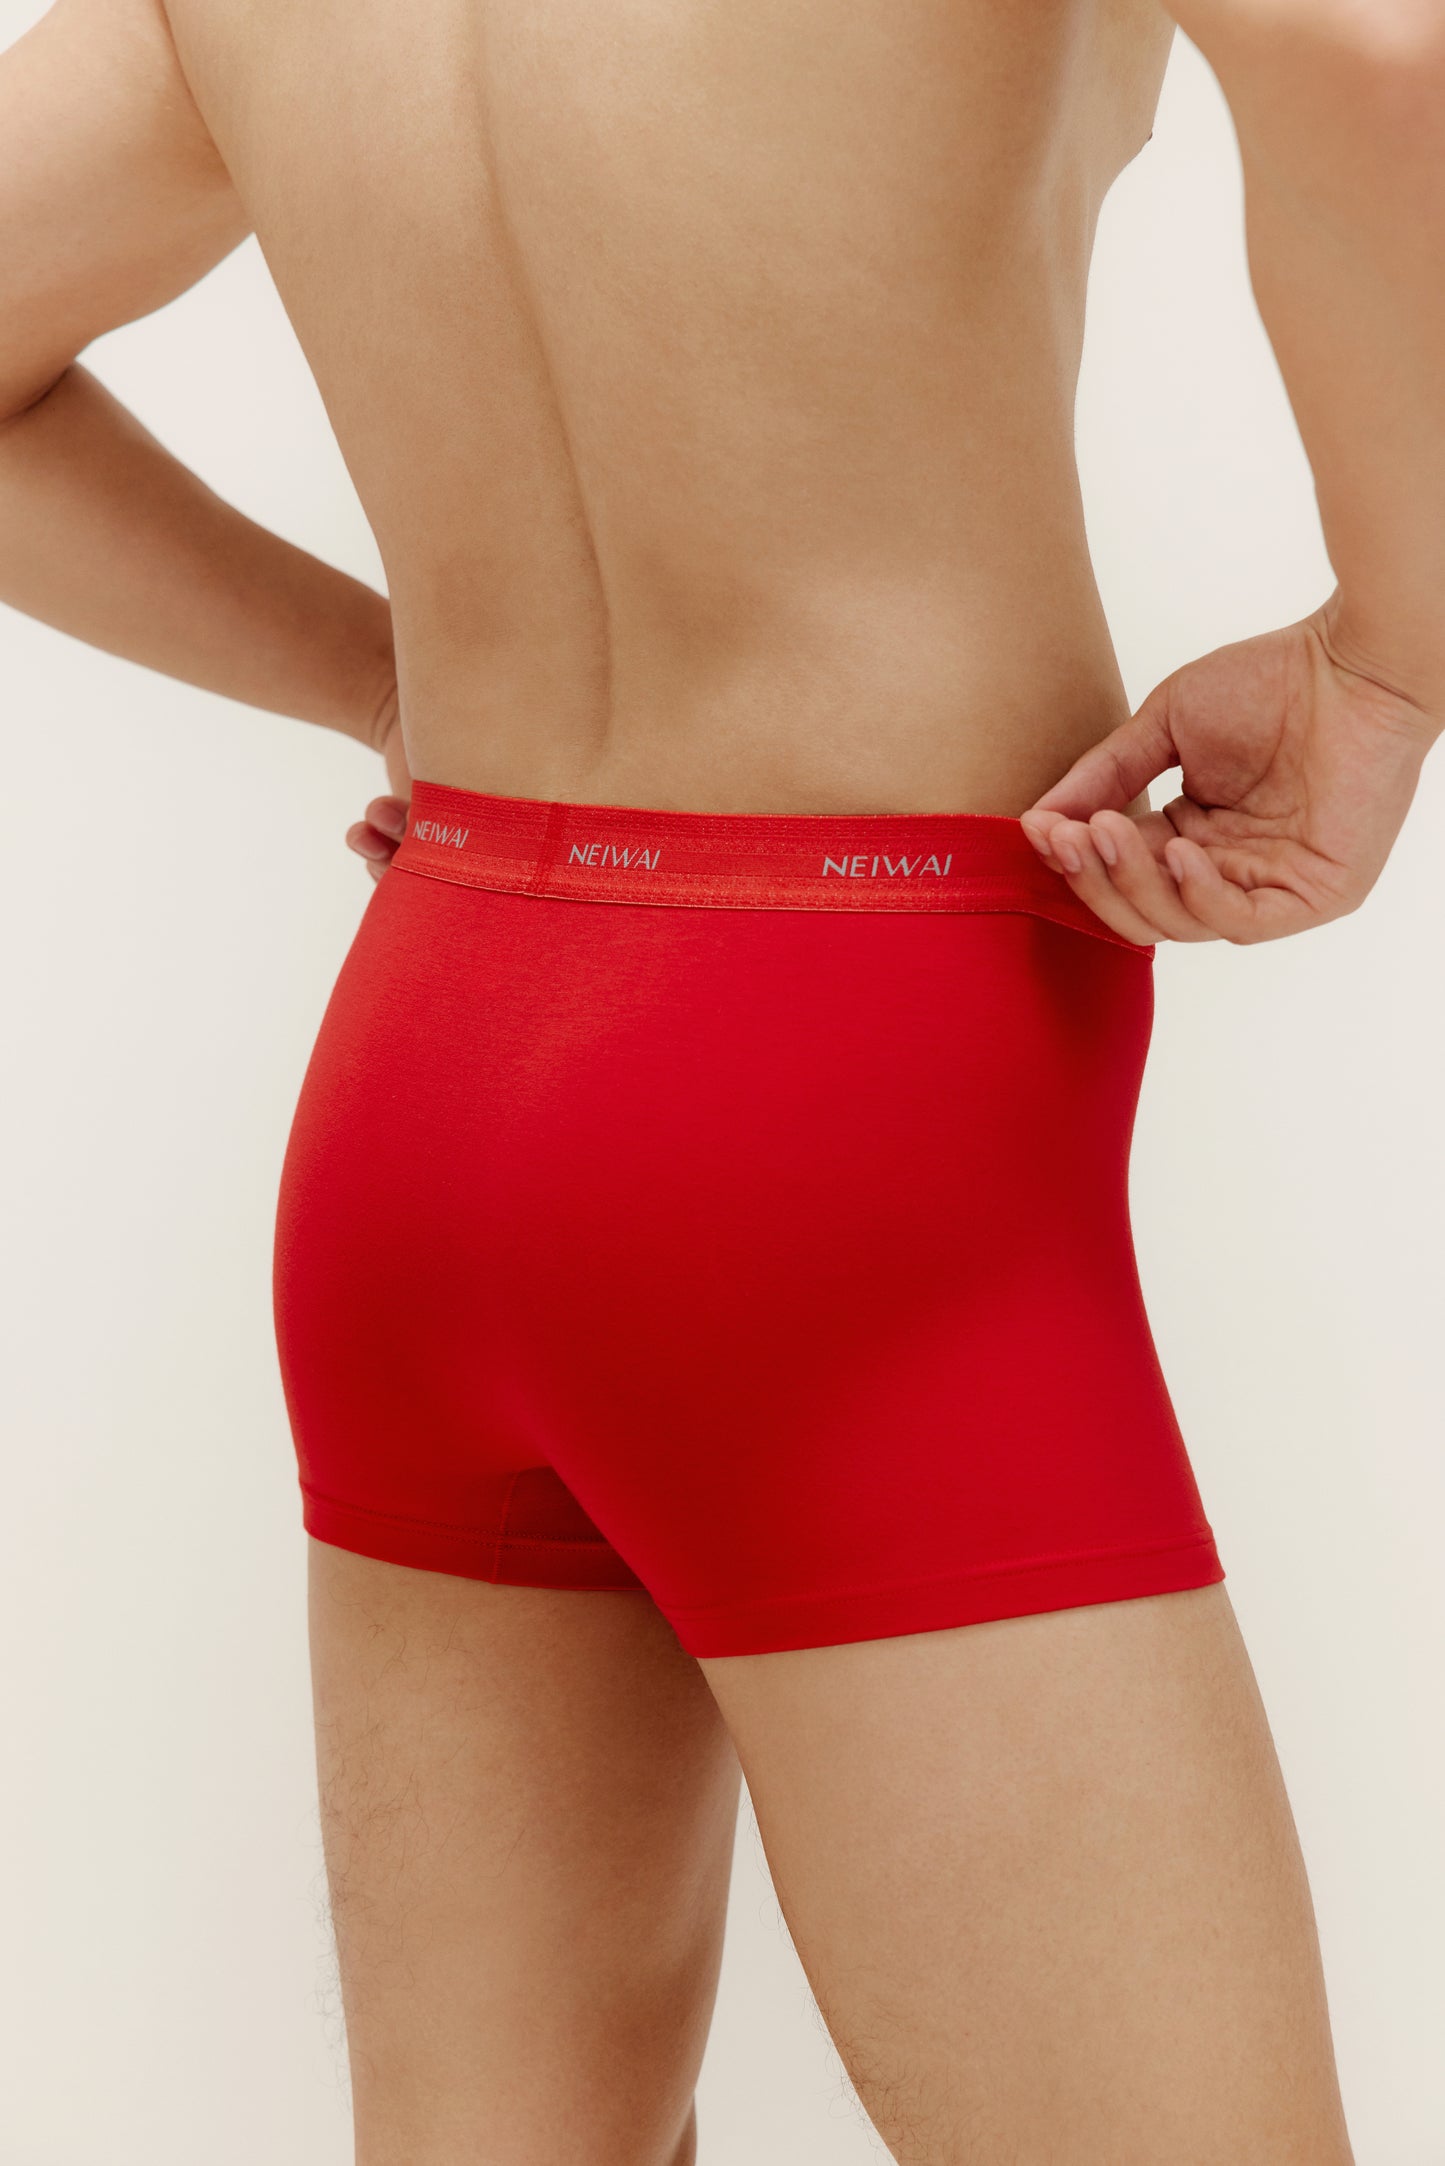 a man wearing a red brief from back view